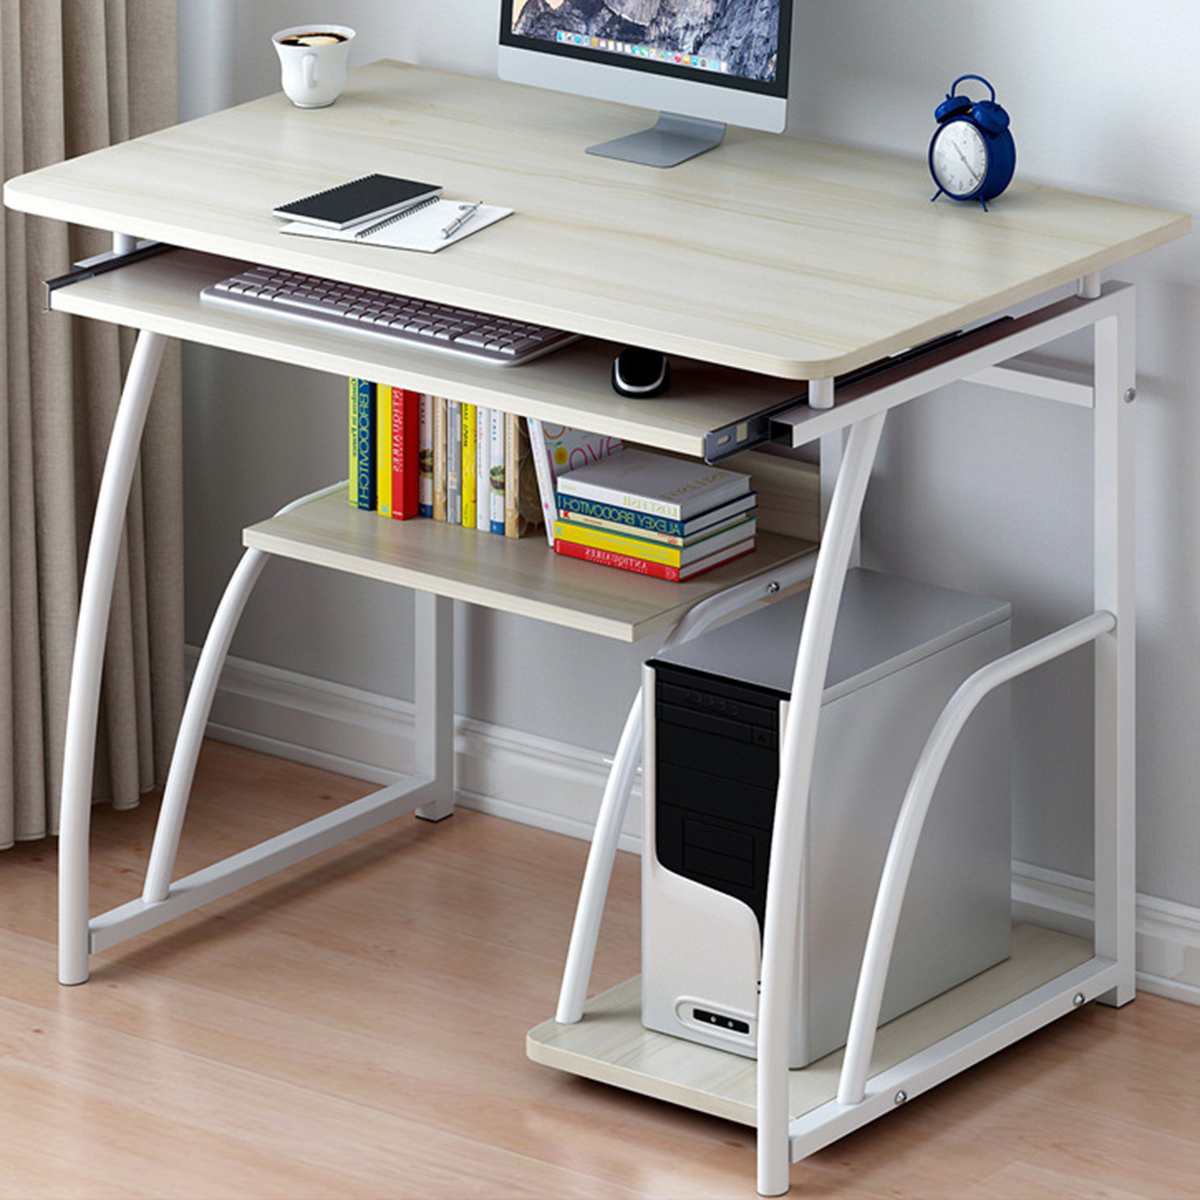 71X70cm Modern Computer Desk with Keyboard bracket PC Workstation Study Writing Table Home Office Furniture Table Office